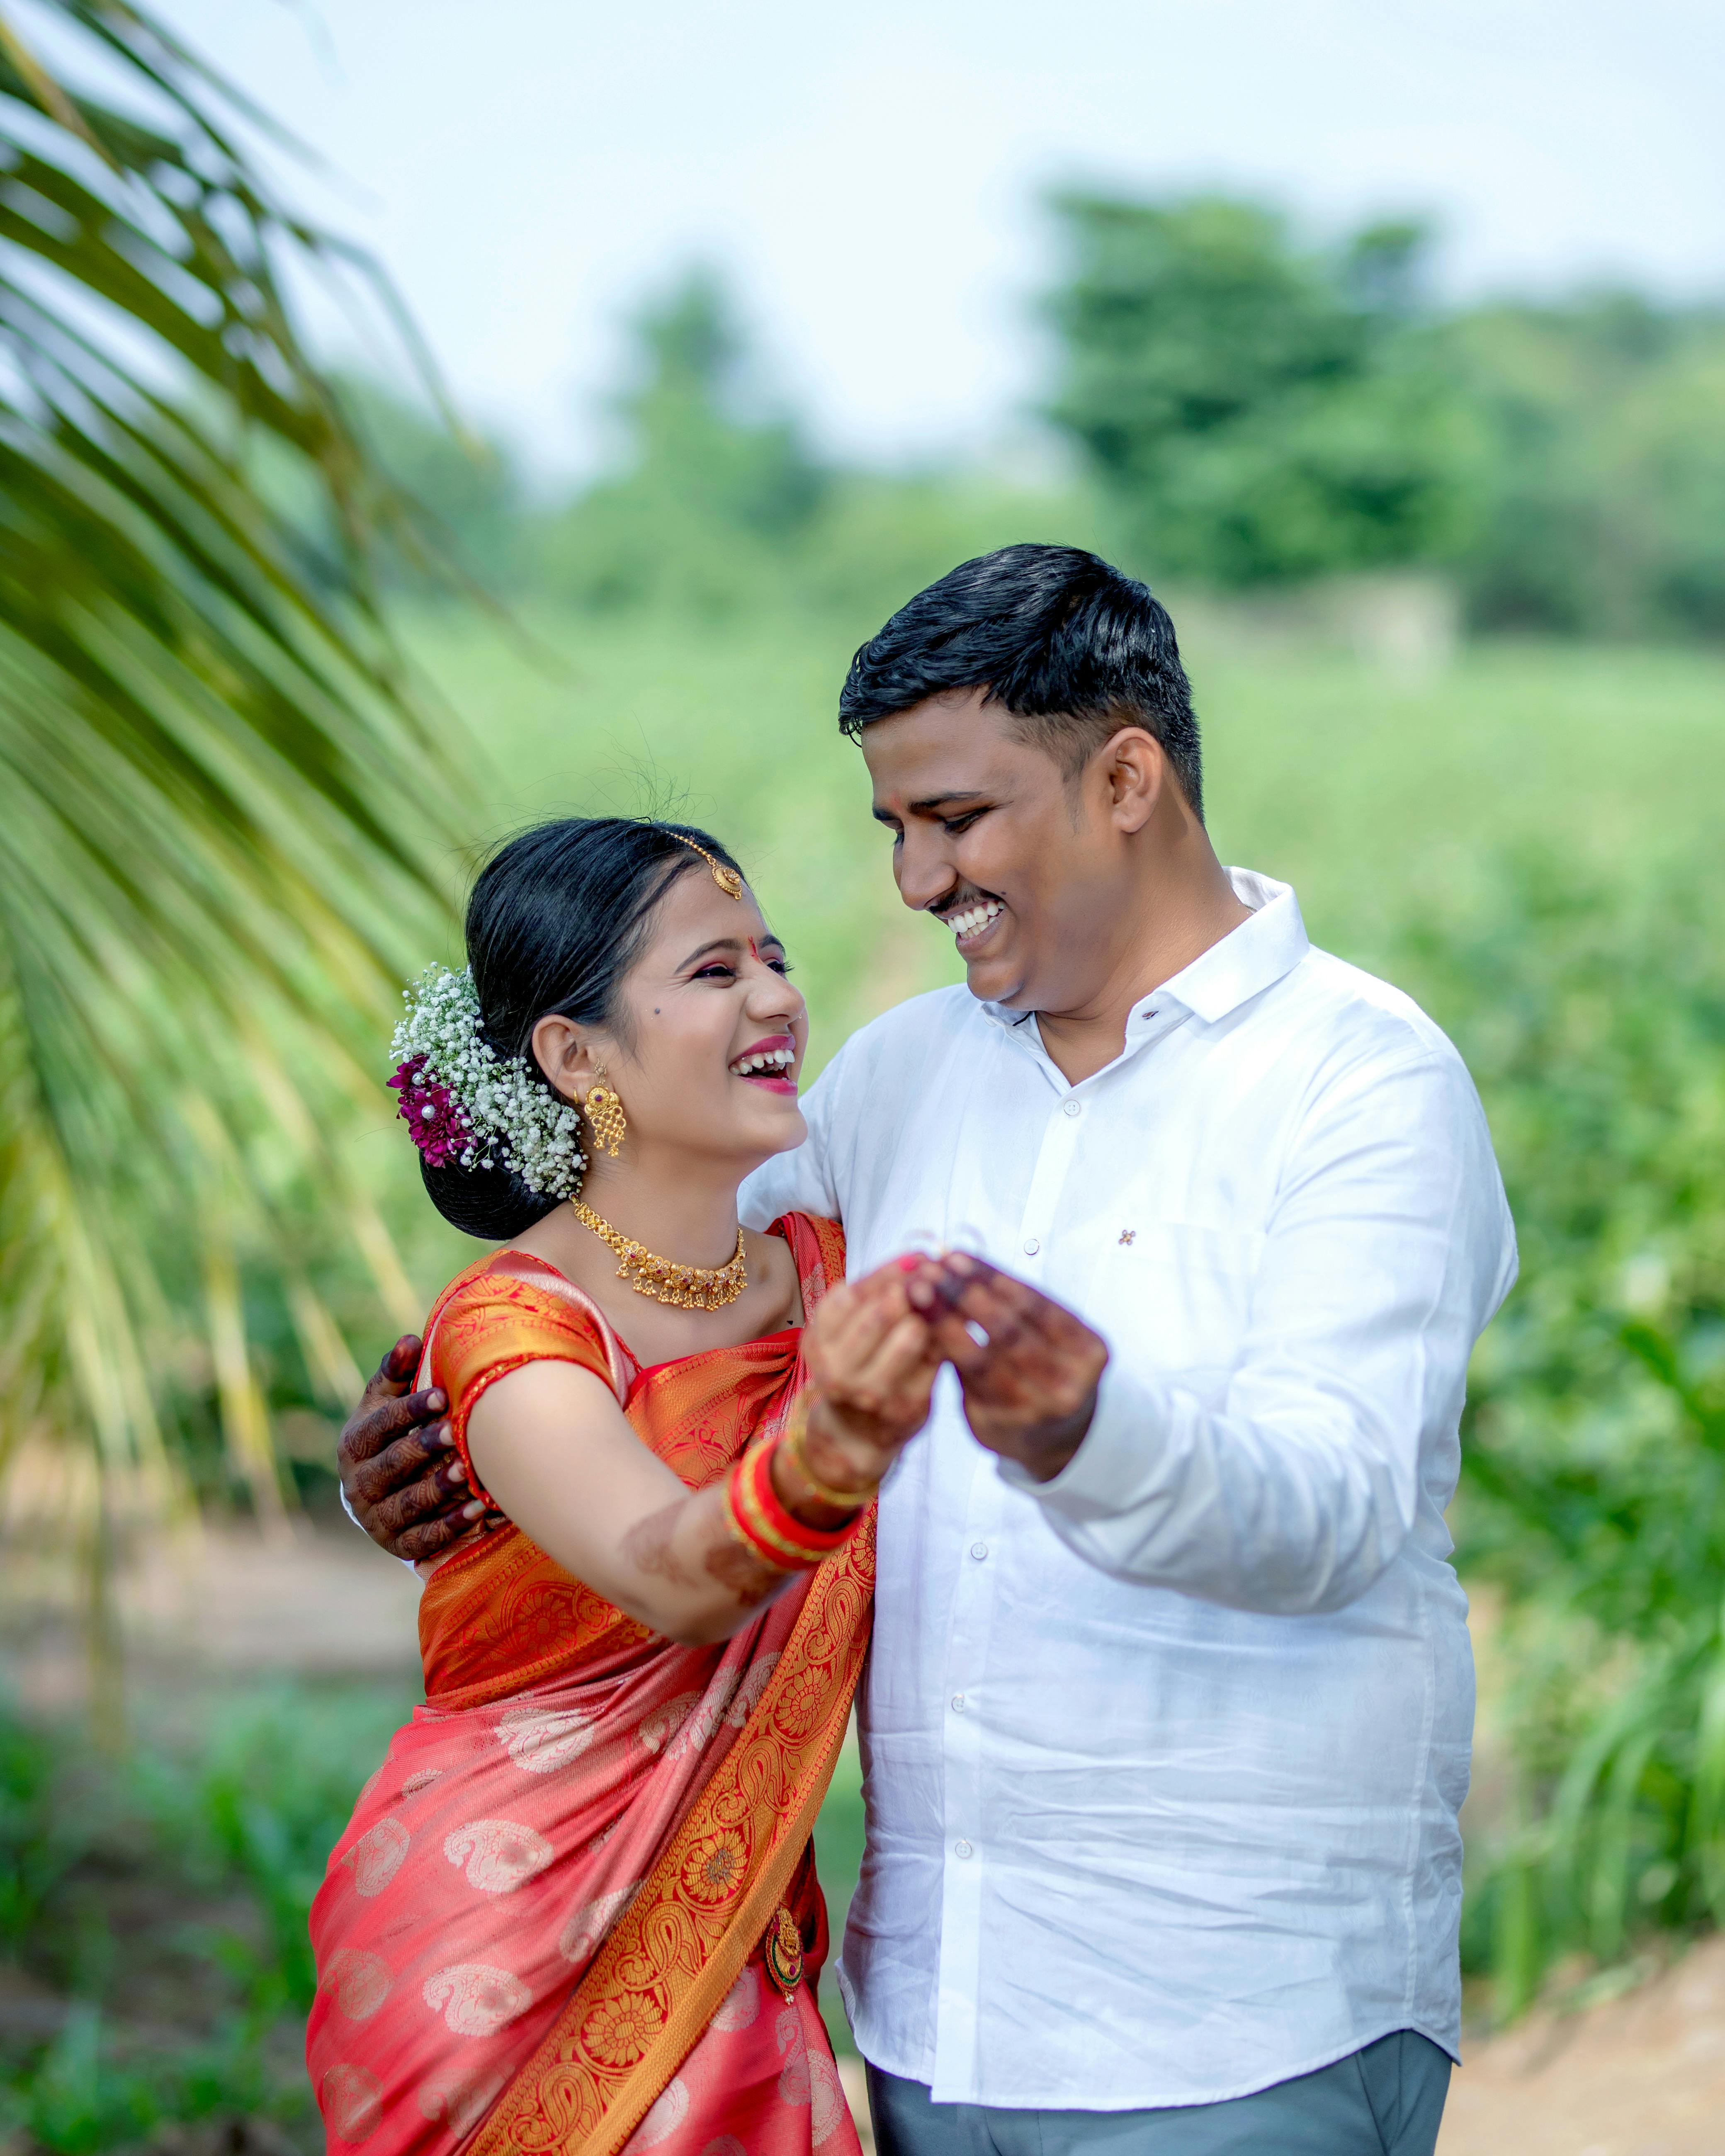 Hindu Ring Engagement Ceremony Indian Couple Exchanging Their Wedding Rings  Stock Photo - Download Image Now - iStock